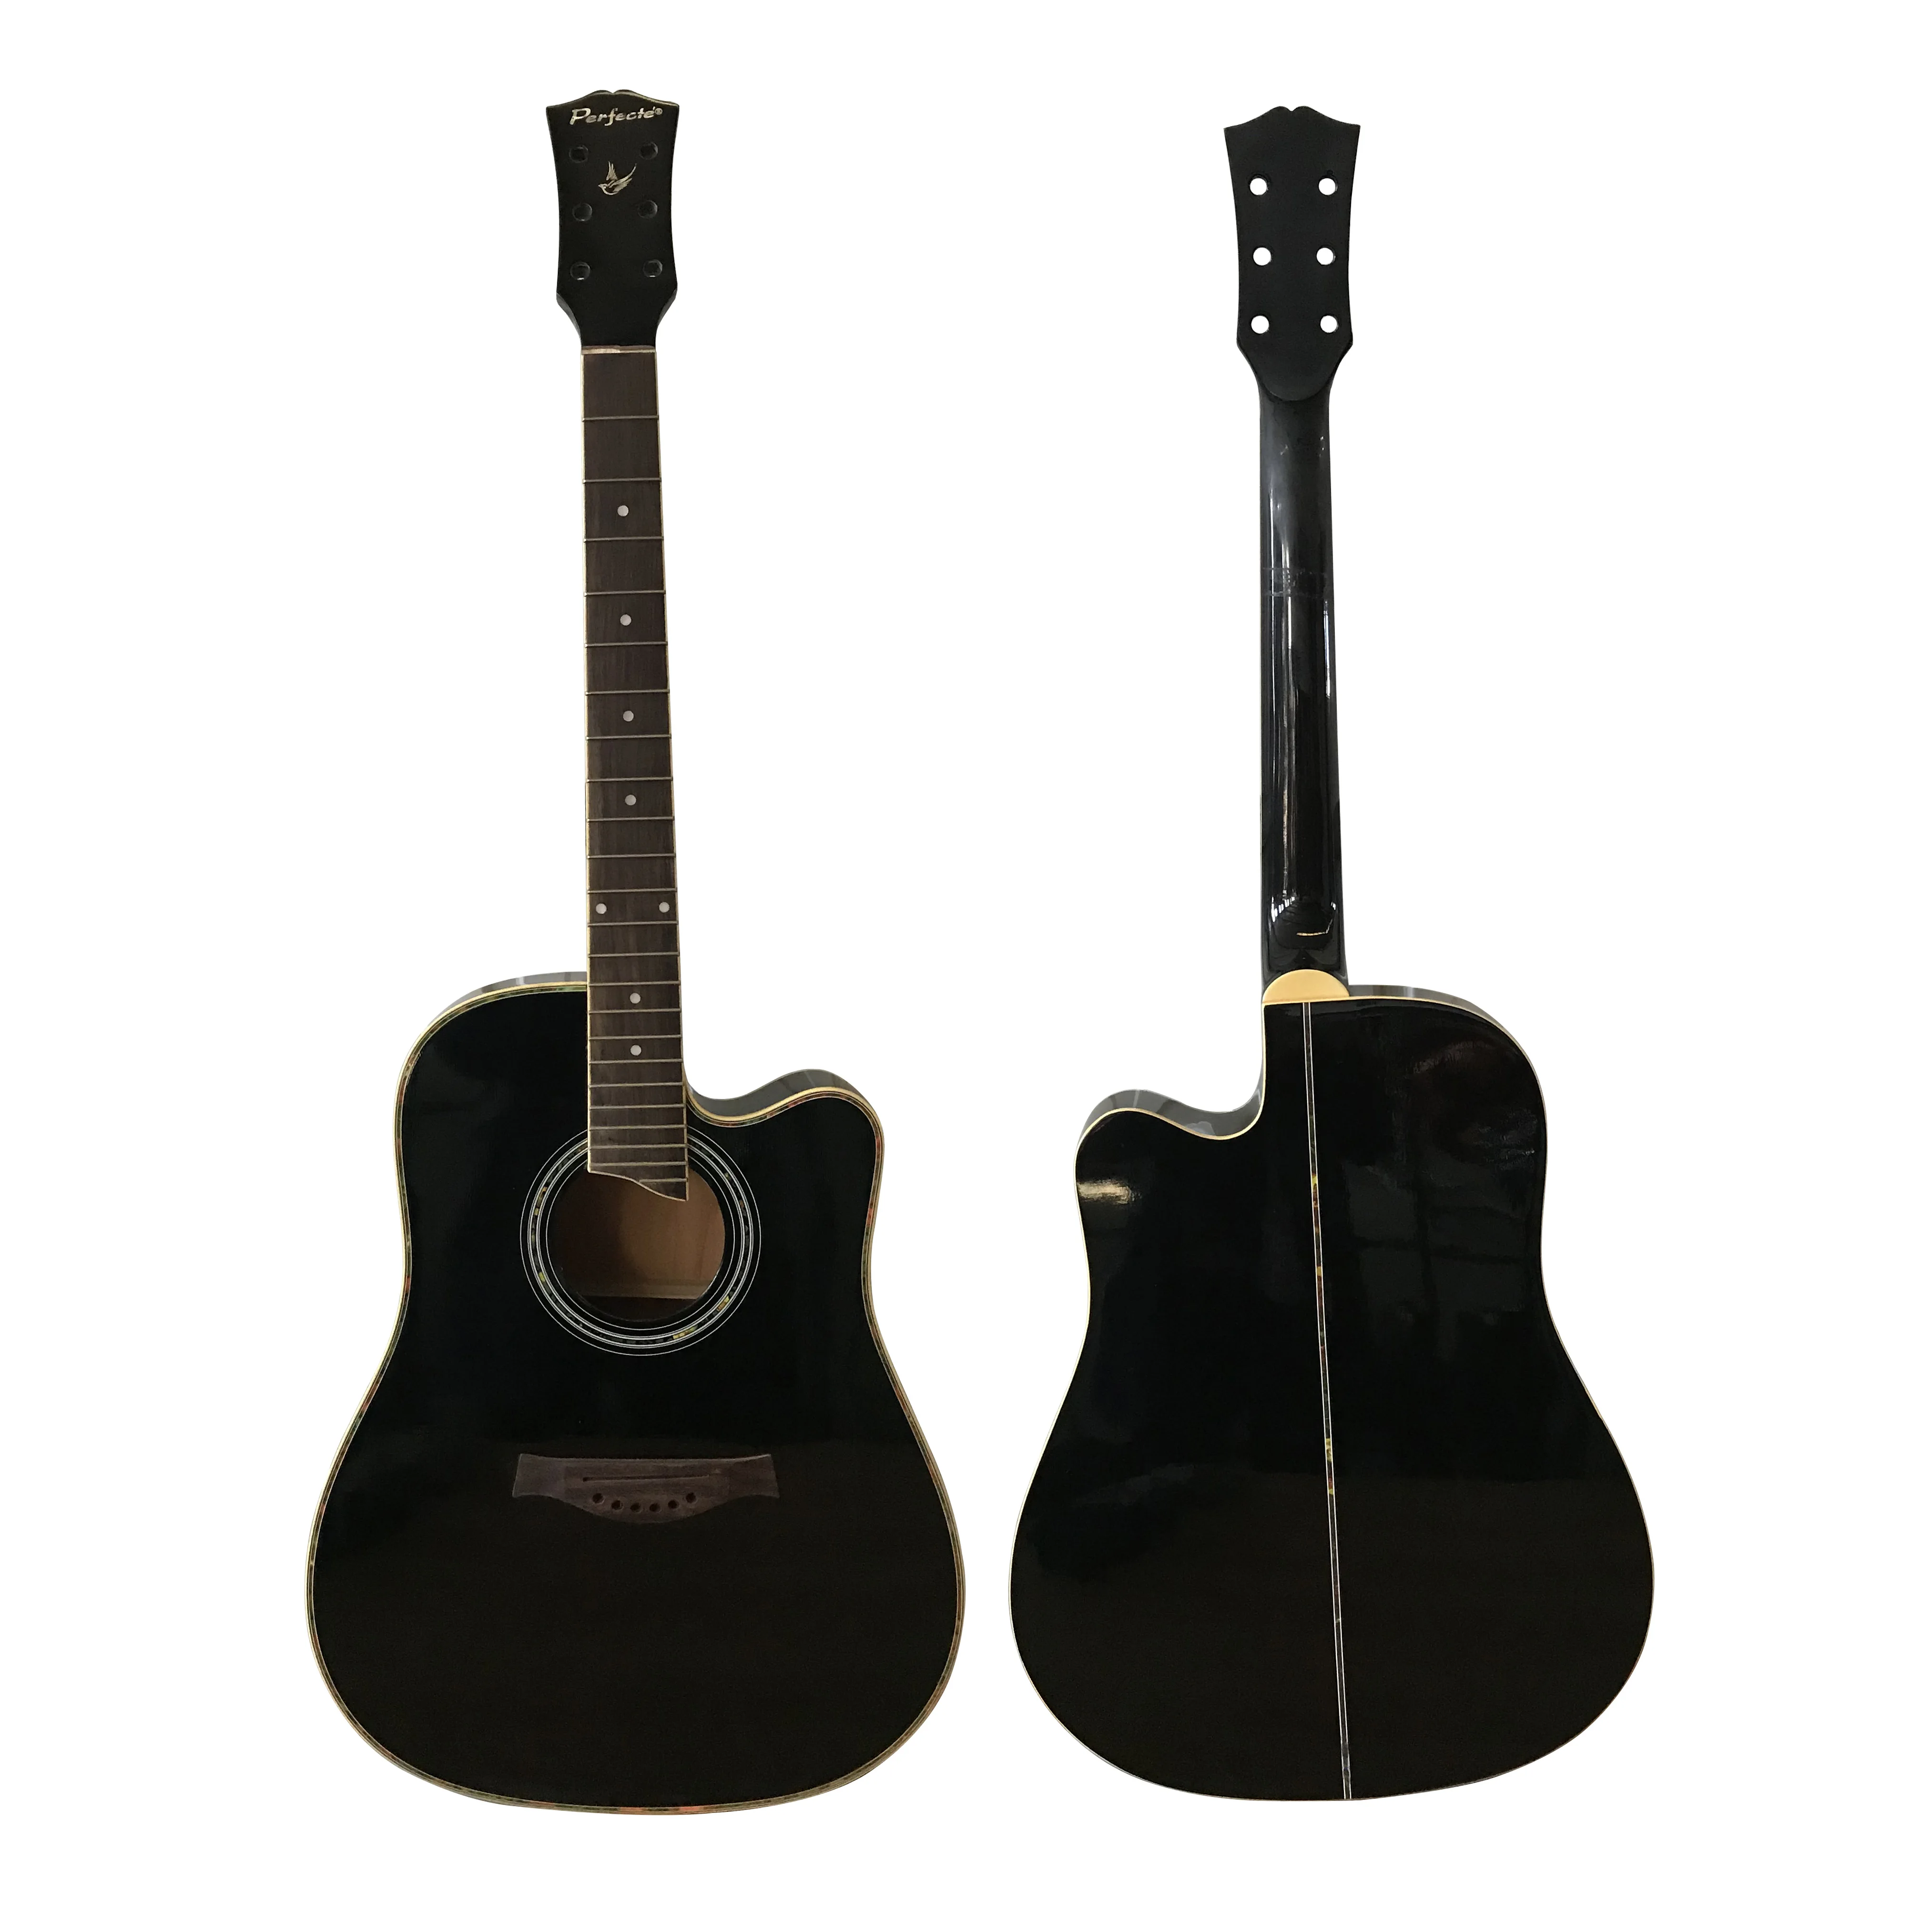 Beautiful Gloss Thin Body Acoustic Guitar Unfinished Spruce 41 Inch 24 Fret Solid Wood DIY 6 Strings Black Color Folk Guitar